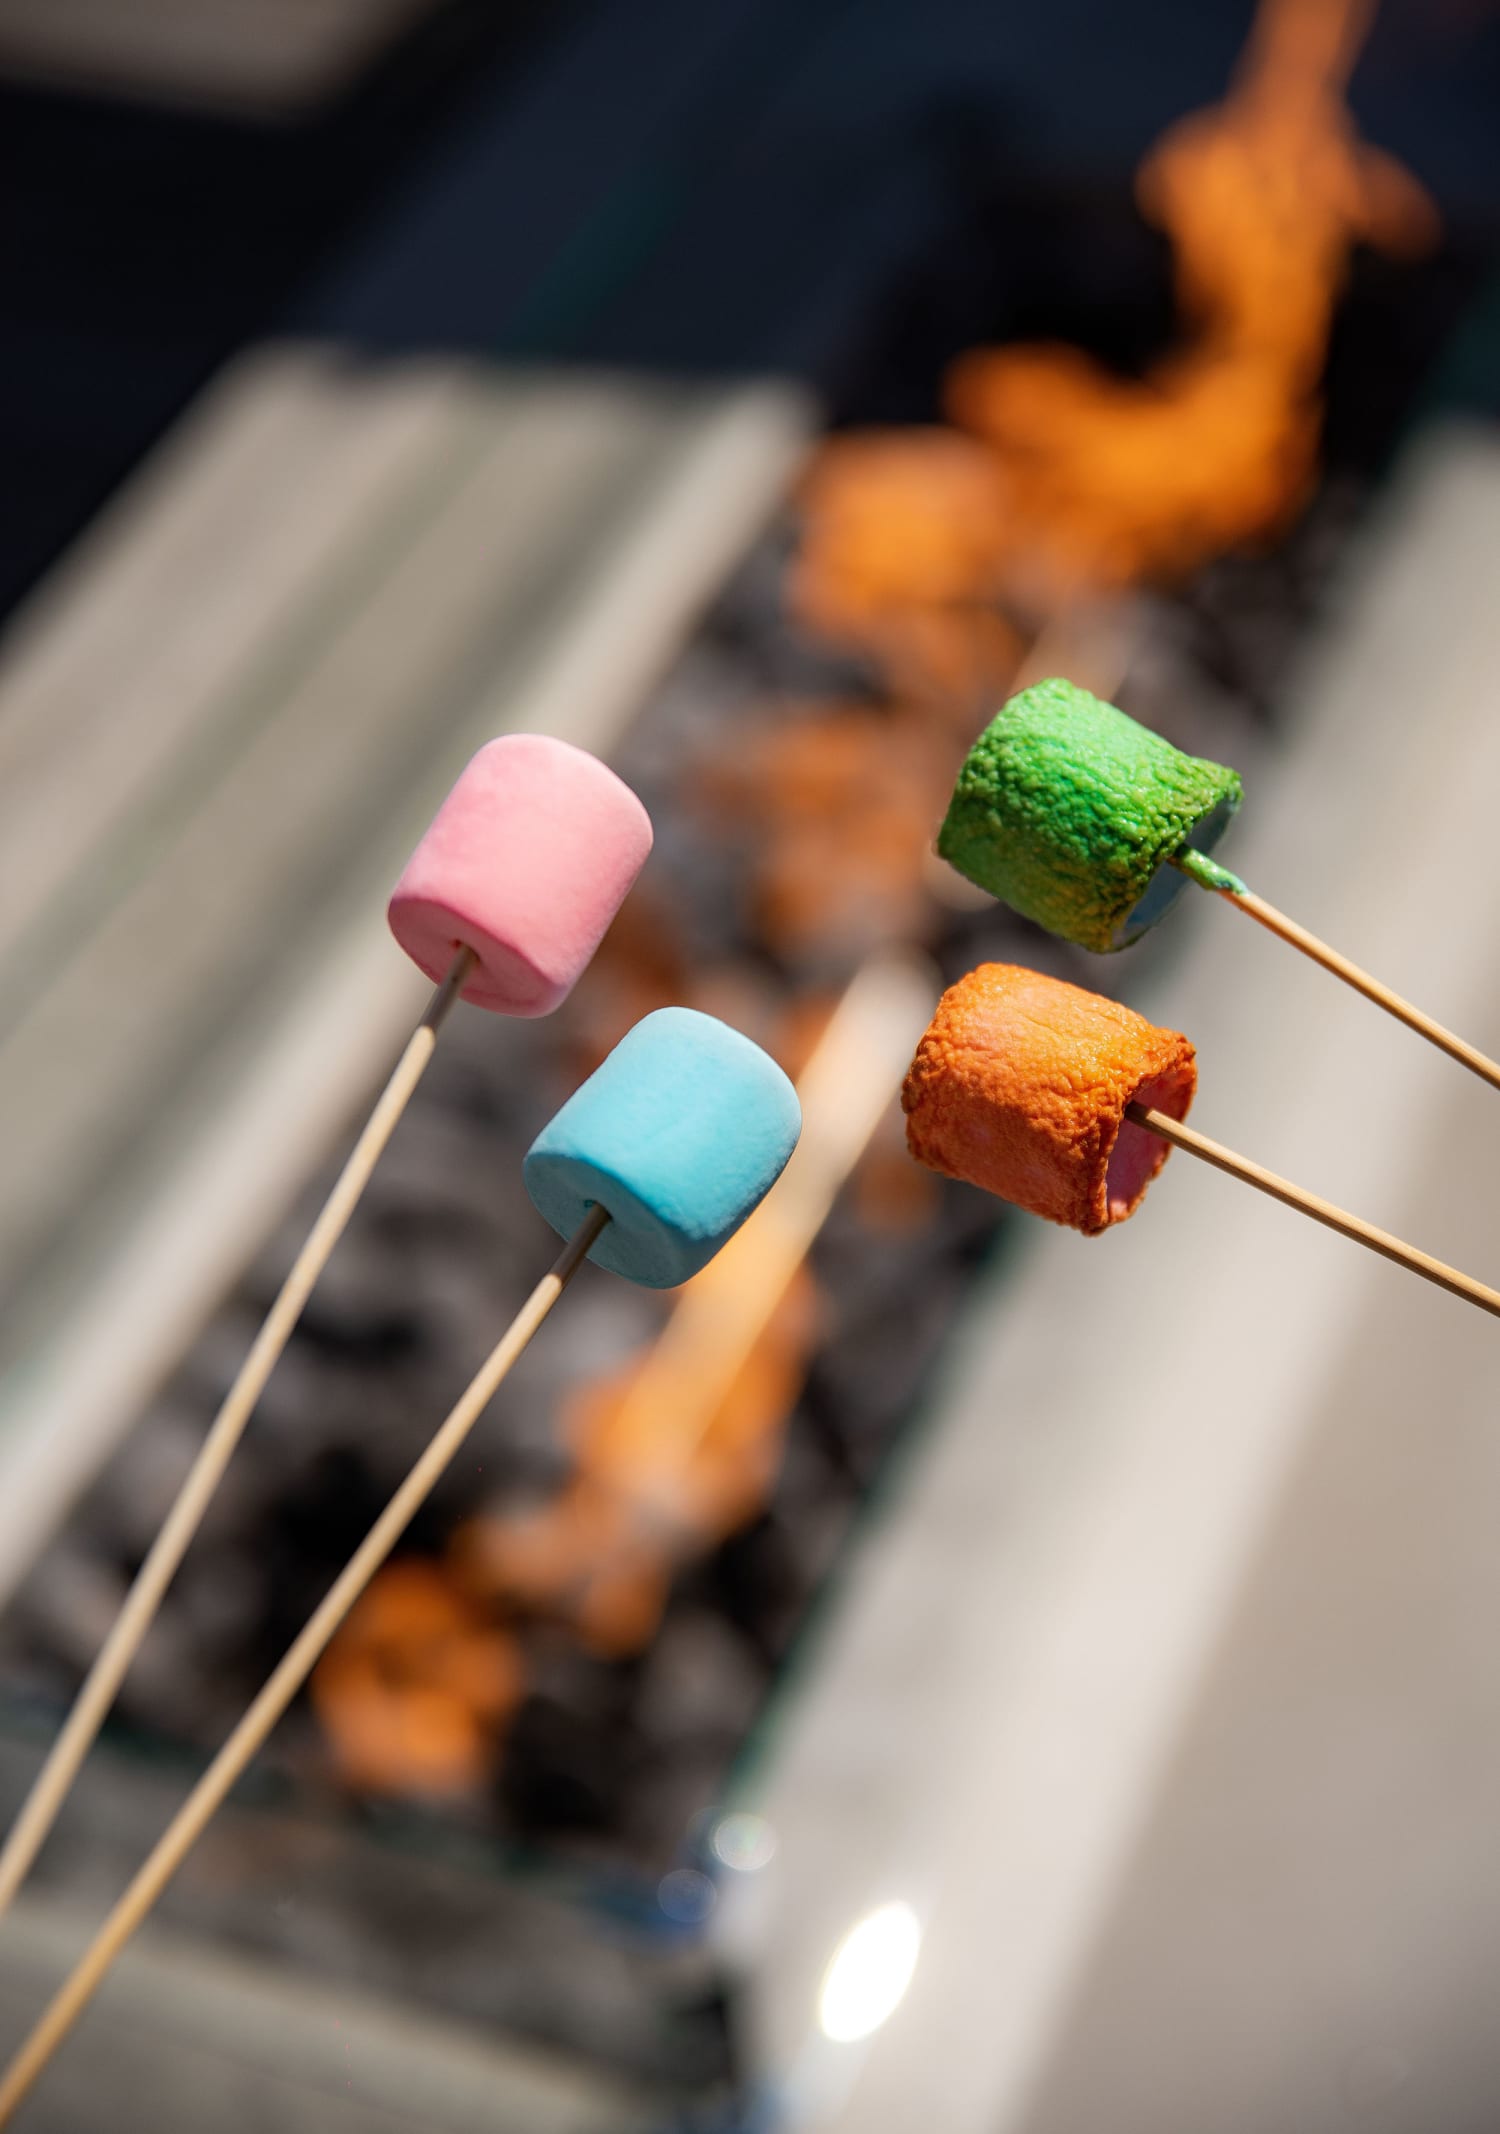 How Do Color Changing Marshmallows Work?